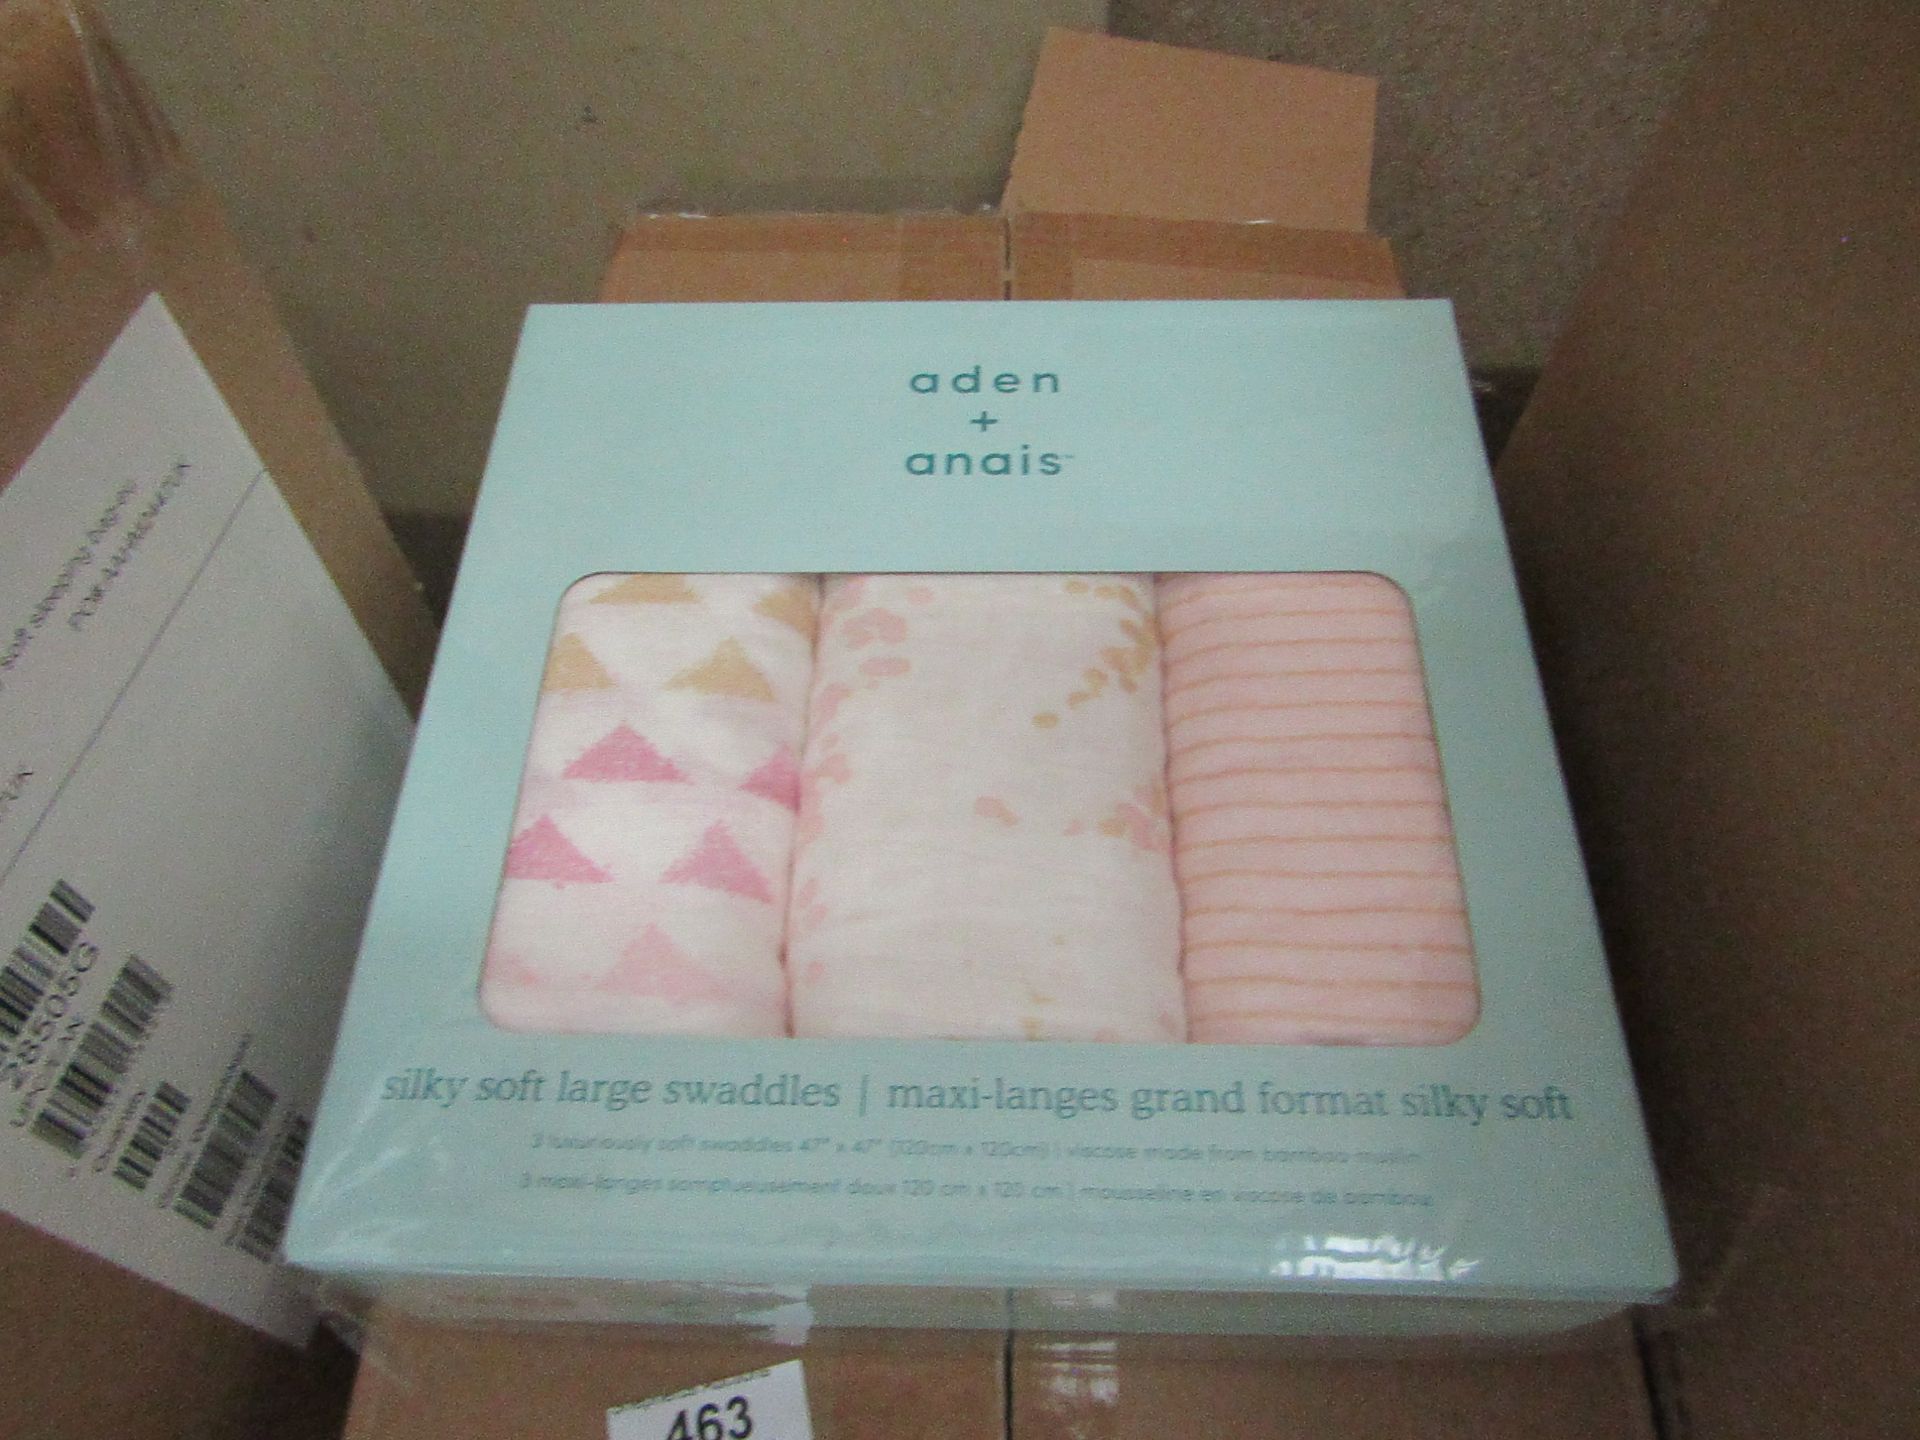 aden + anais pack of 3 Silky Soft Large Swaddles, new and sealed in box